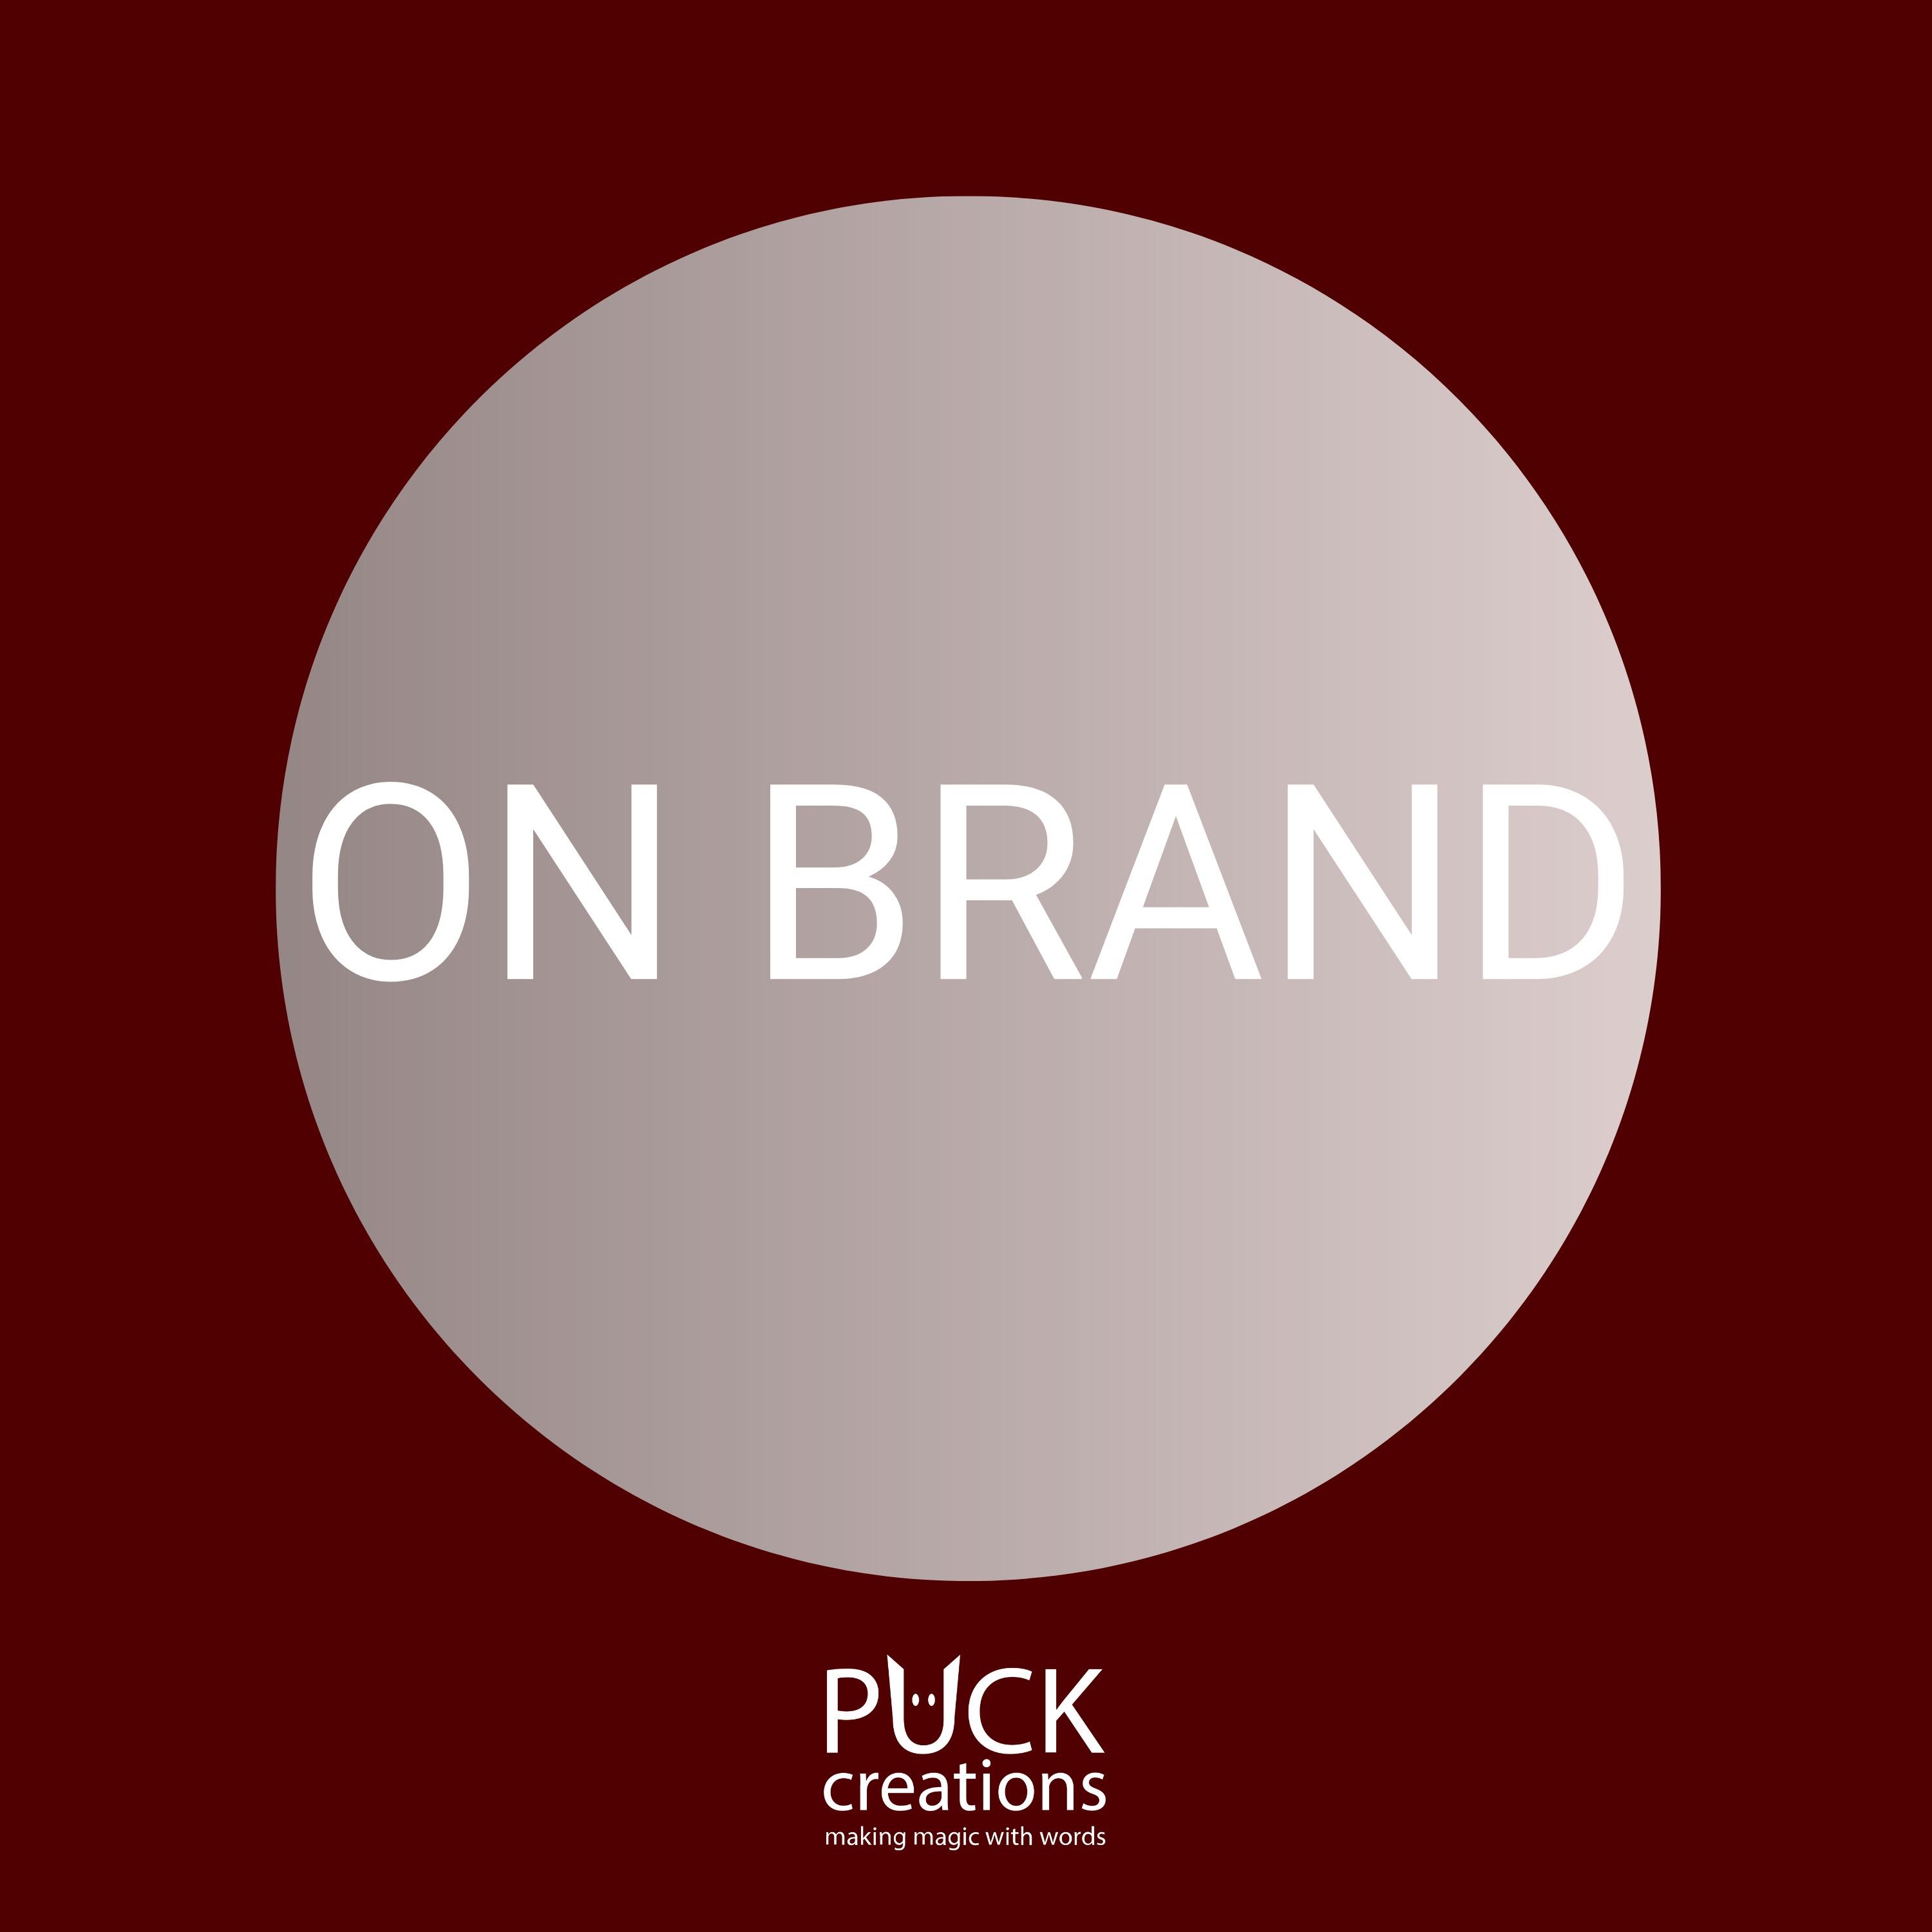 Puck Creations on Brand